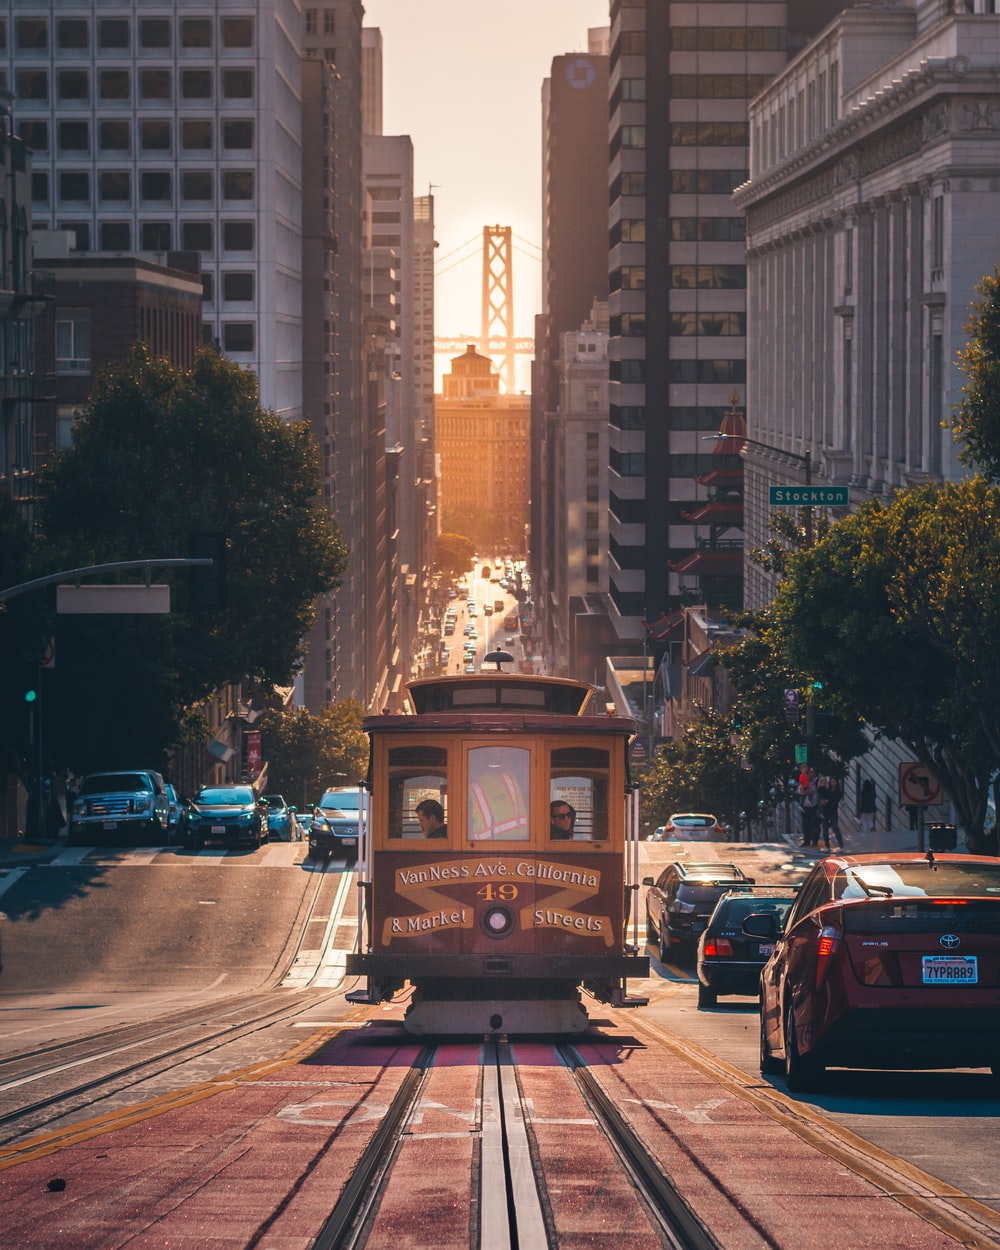 San Francisco Picture [Stunning]. Download Free Image